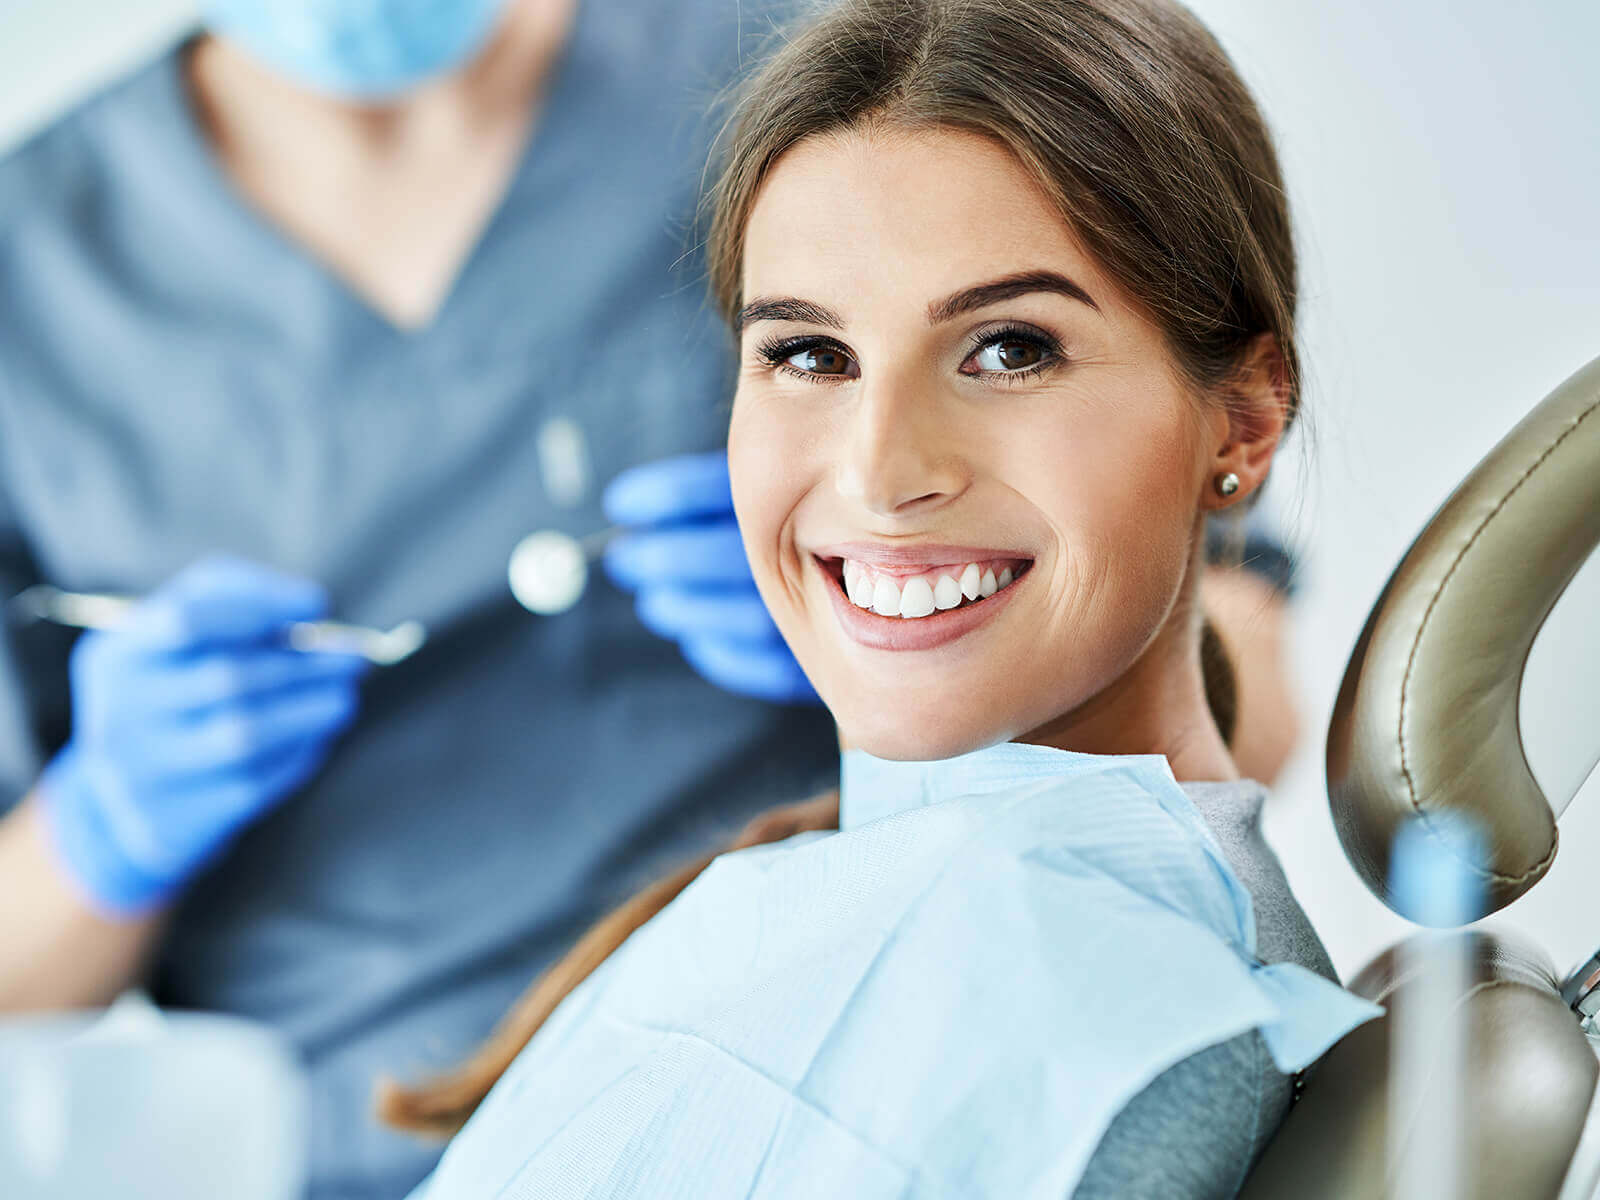 Dental Fillings Could Improve Your Smile